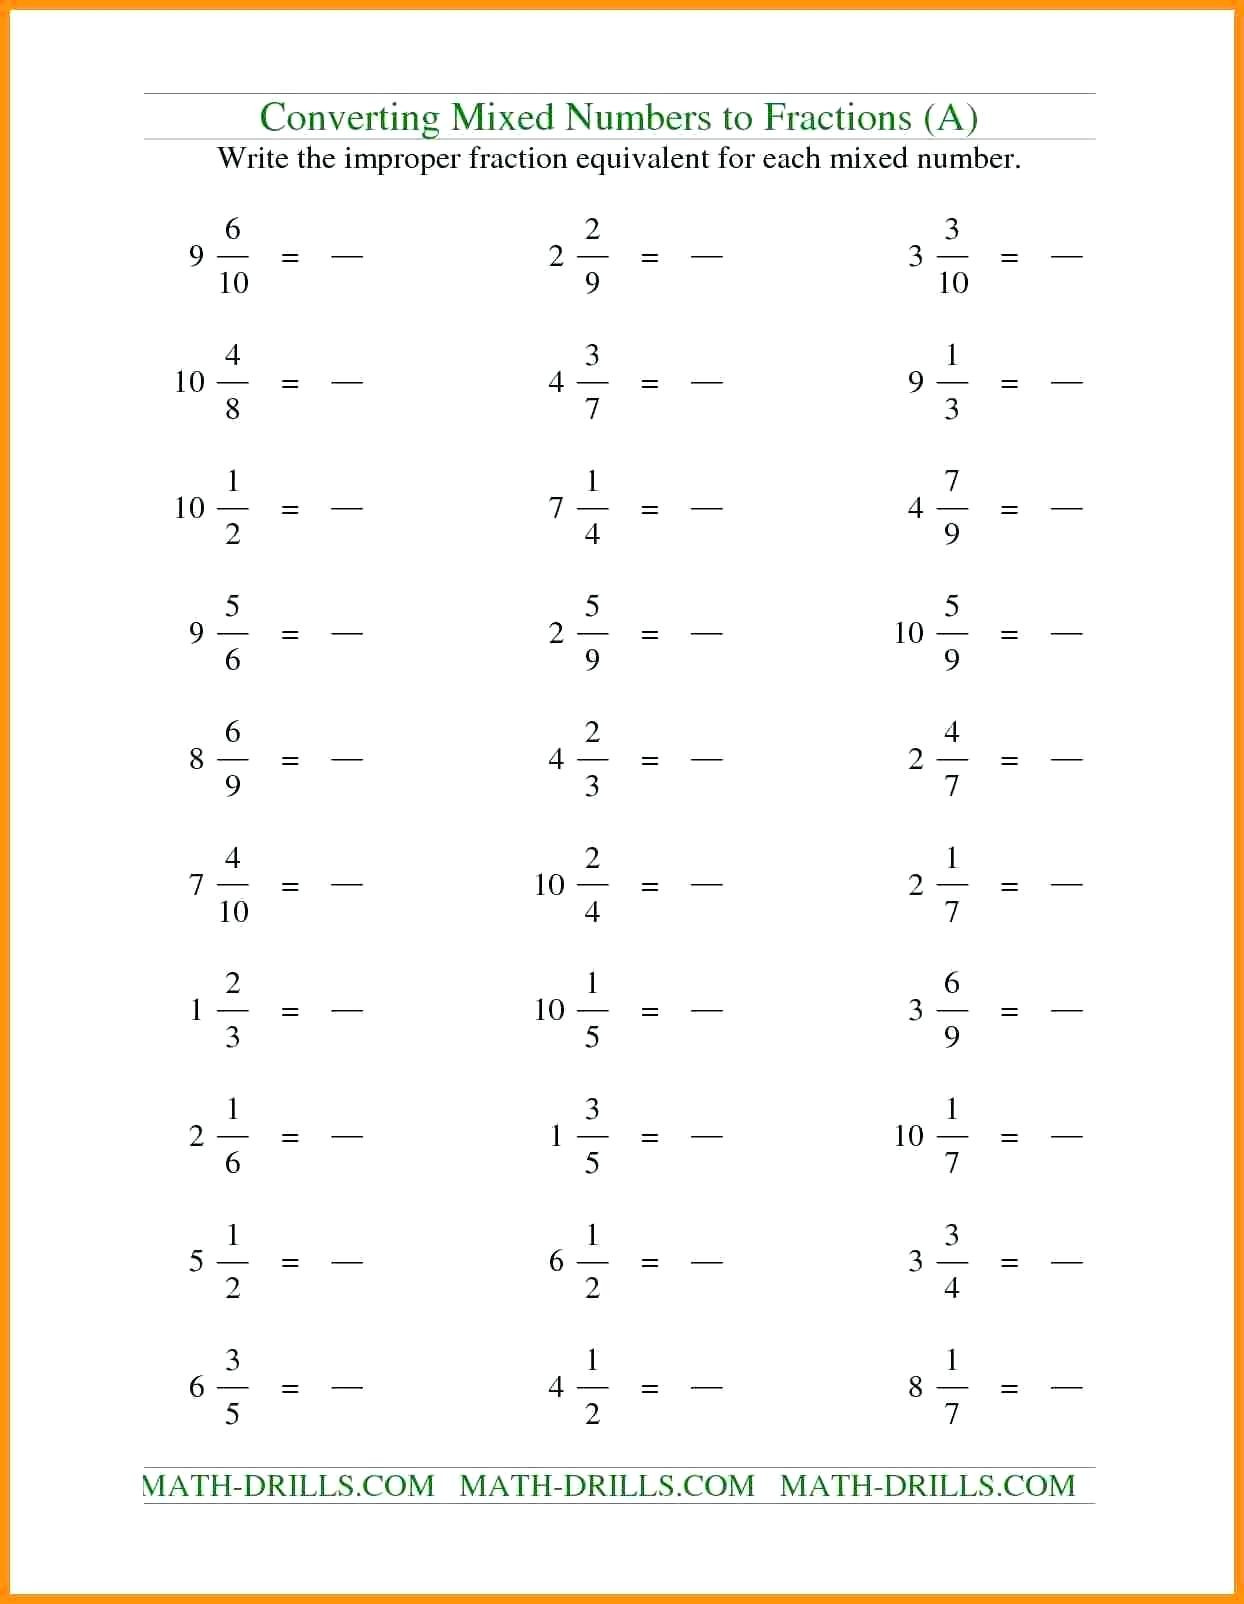 line worksheet art educational apps for 2nd graders fun subtraction with regrouping worksheets p4 science grade math printable mon core workbooks numeration double digit multiplication